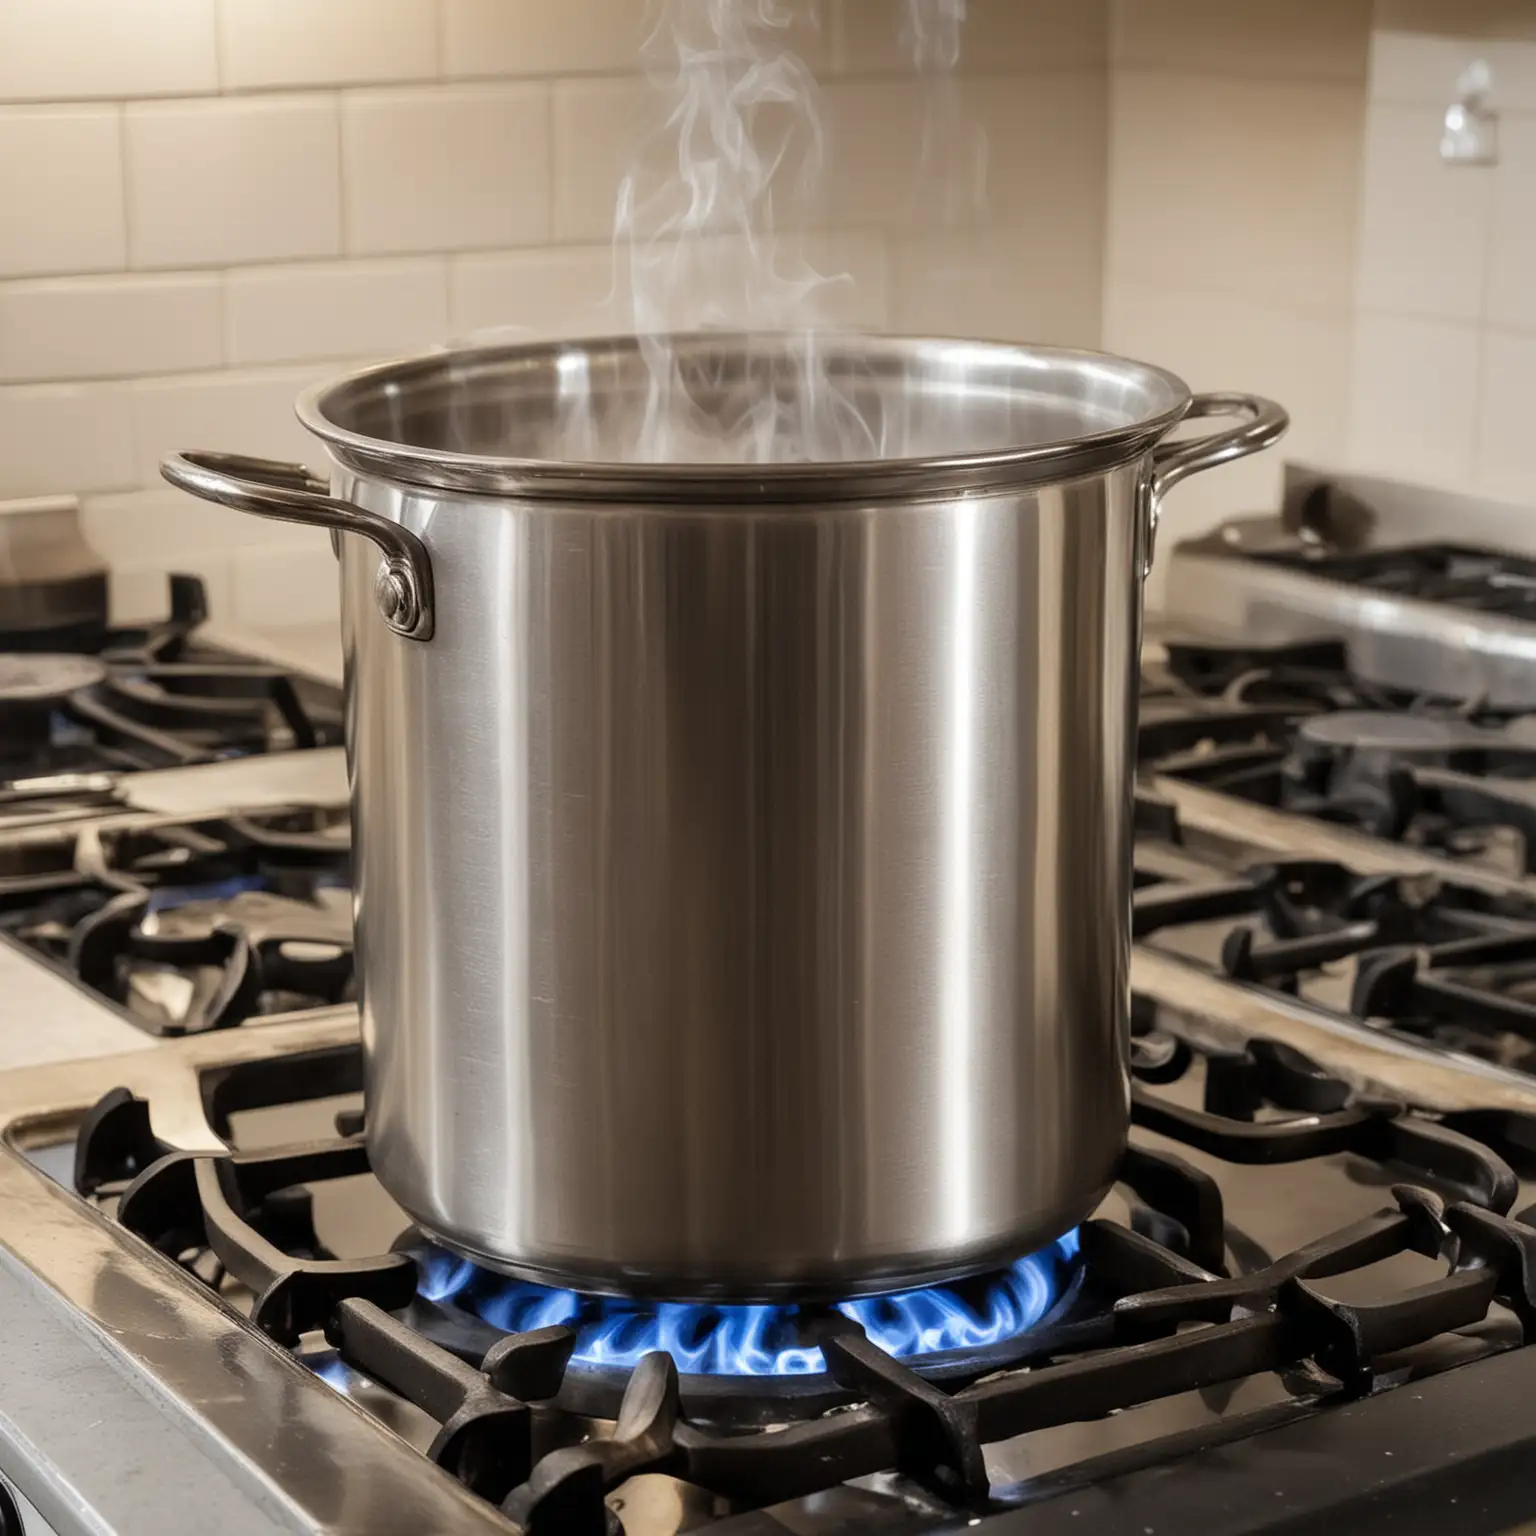 Stainless Steel Pot Boiling on Gas Stove with Steam